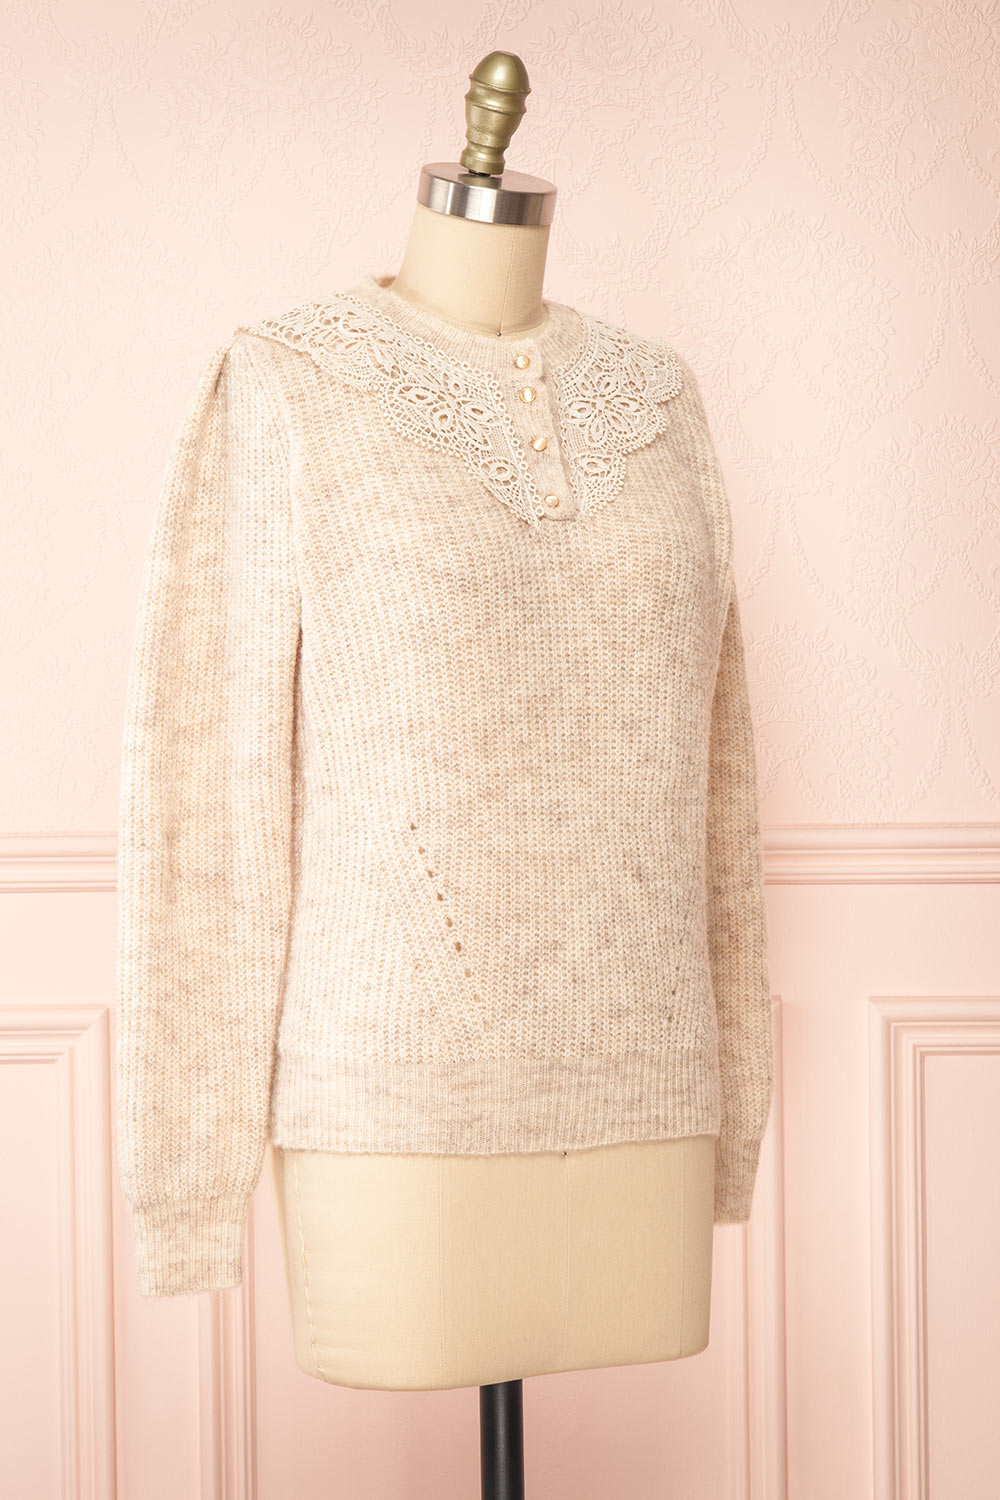 Reagan Beige Buttoned Collar Sweater w/ Lace | Boutique 1861 side view